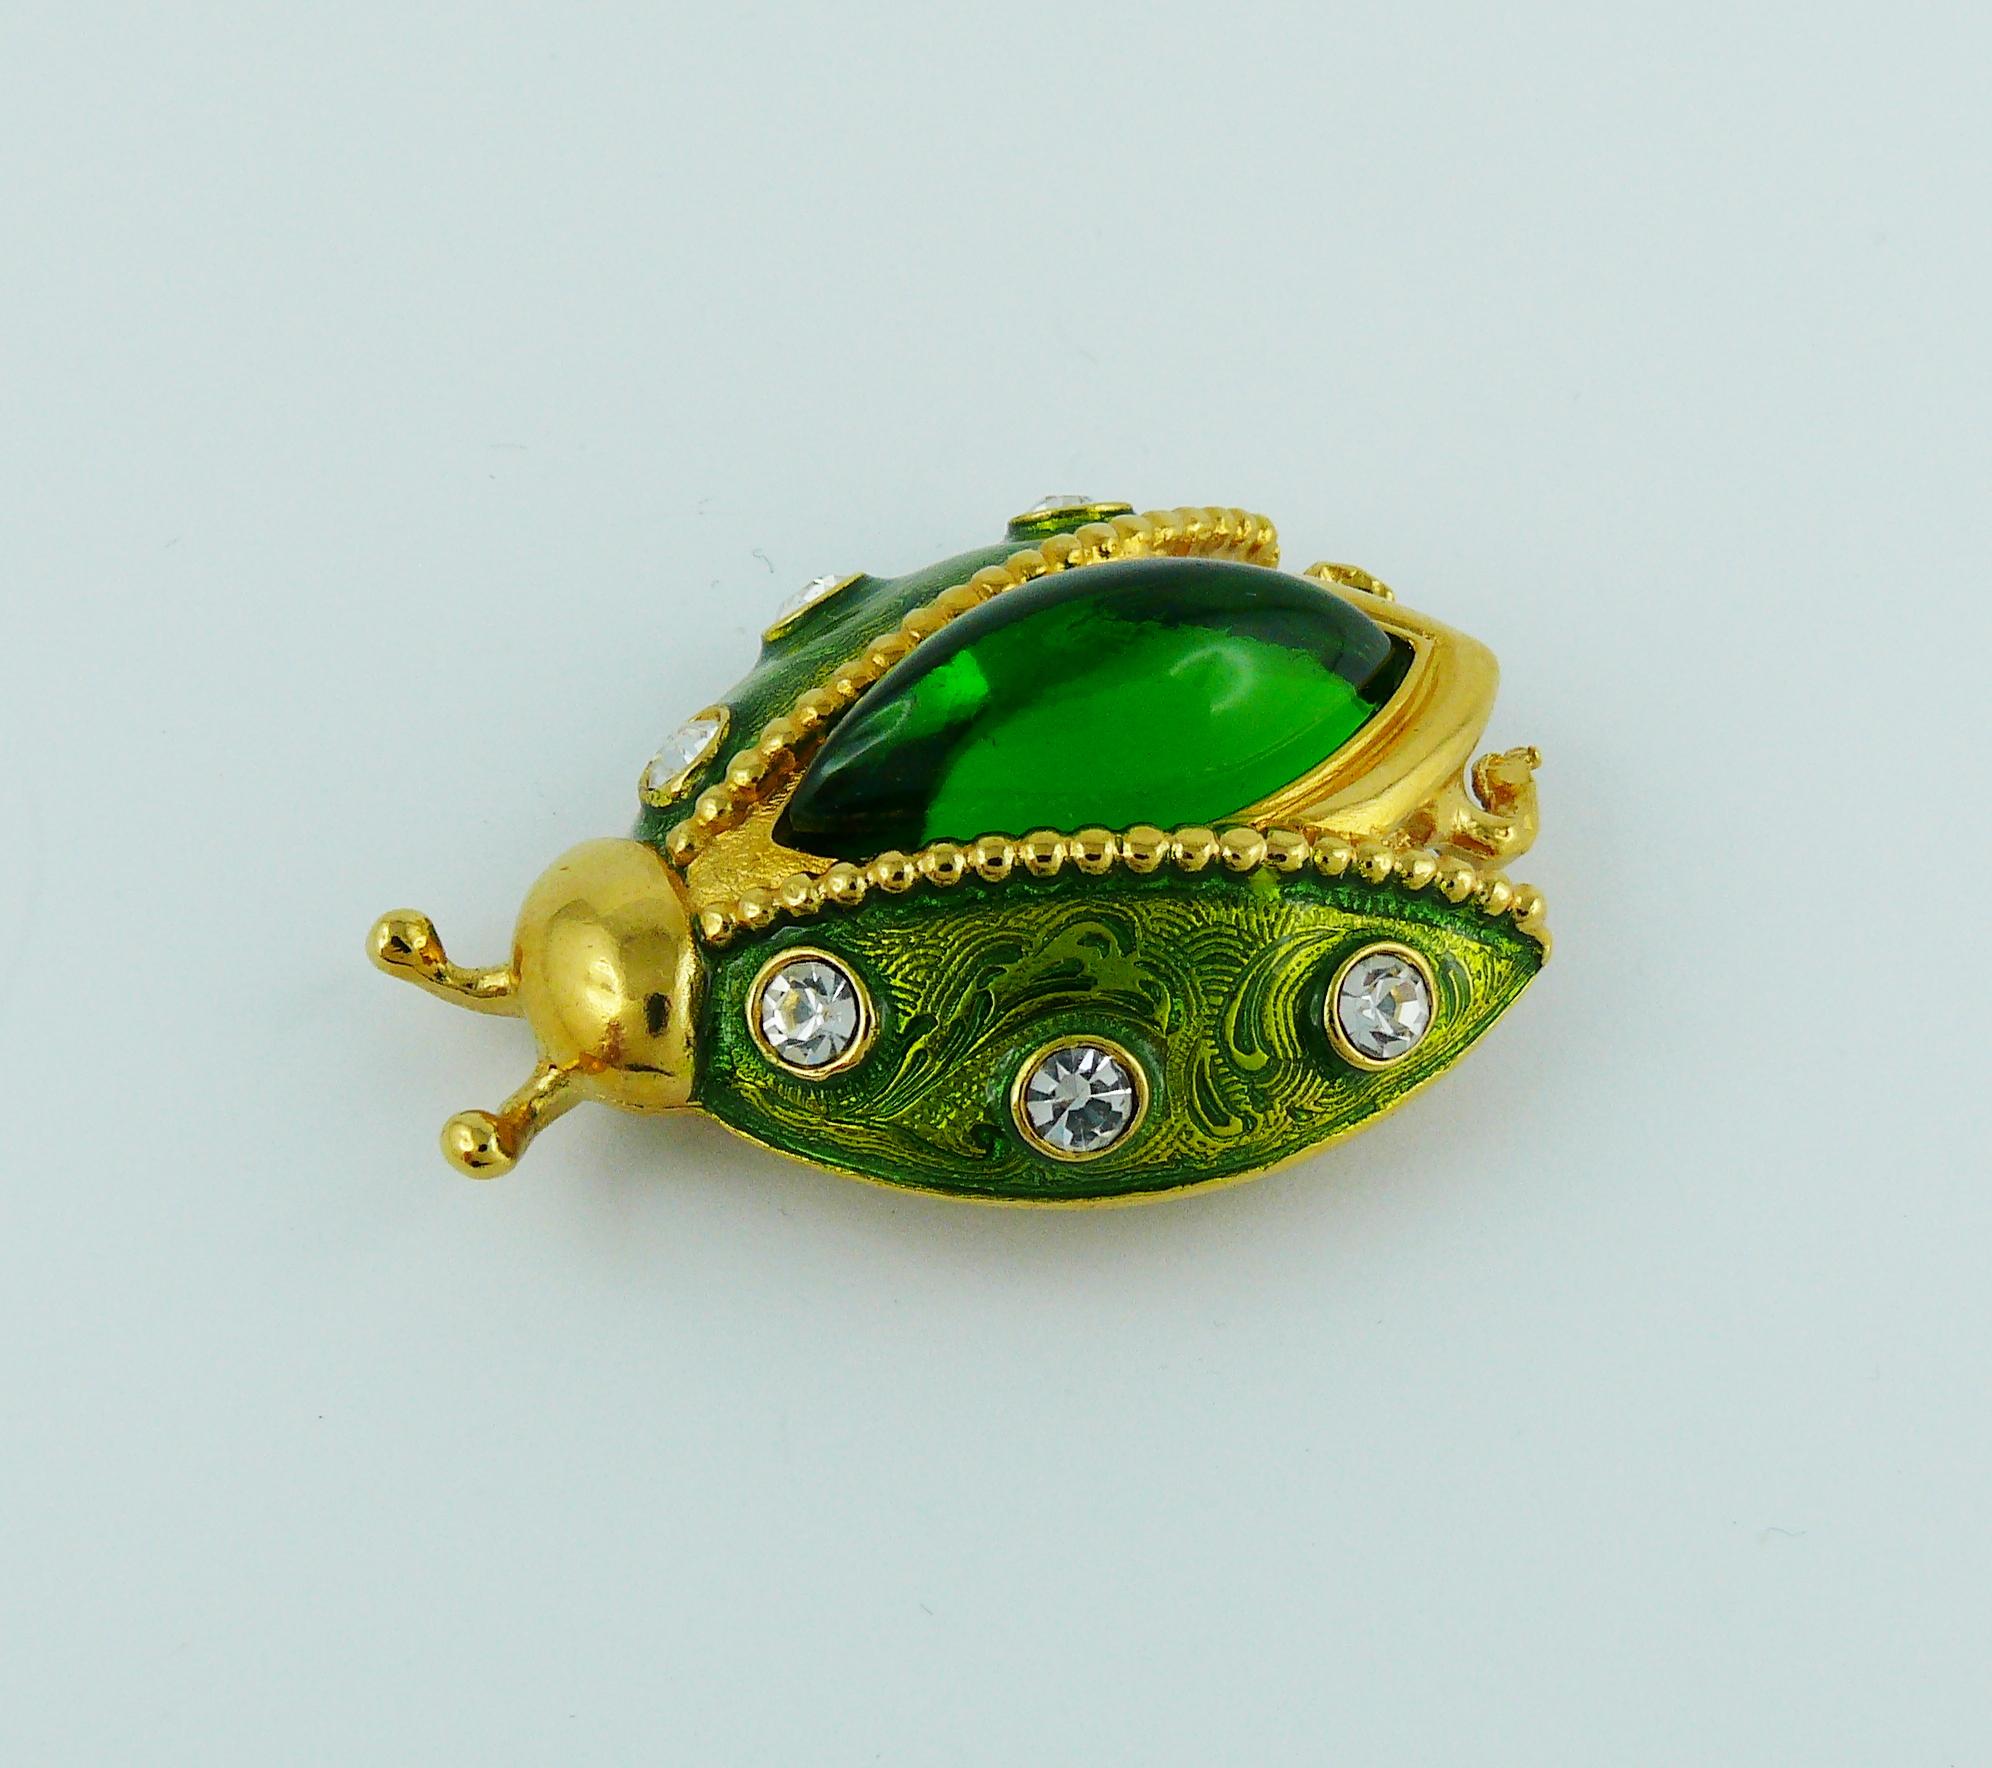 CHRISTIAN DIOR vintage rare jeweled ladybug brooch.

Enameled gold tone metal, embellished with white rhinestones and a green resin domed almond cabochon.

Marked PARFUMS CHRISTIAN DIOR.

Indicative measurements : max. length approx. 4.2 cm (1.65